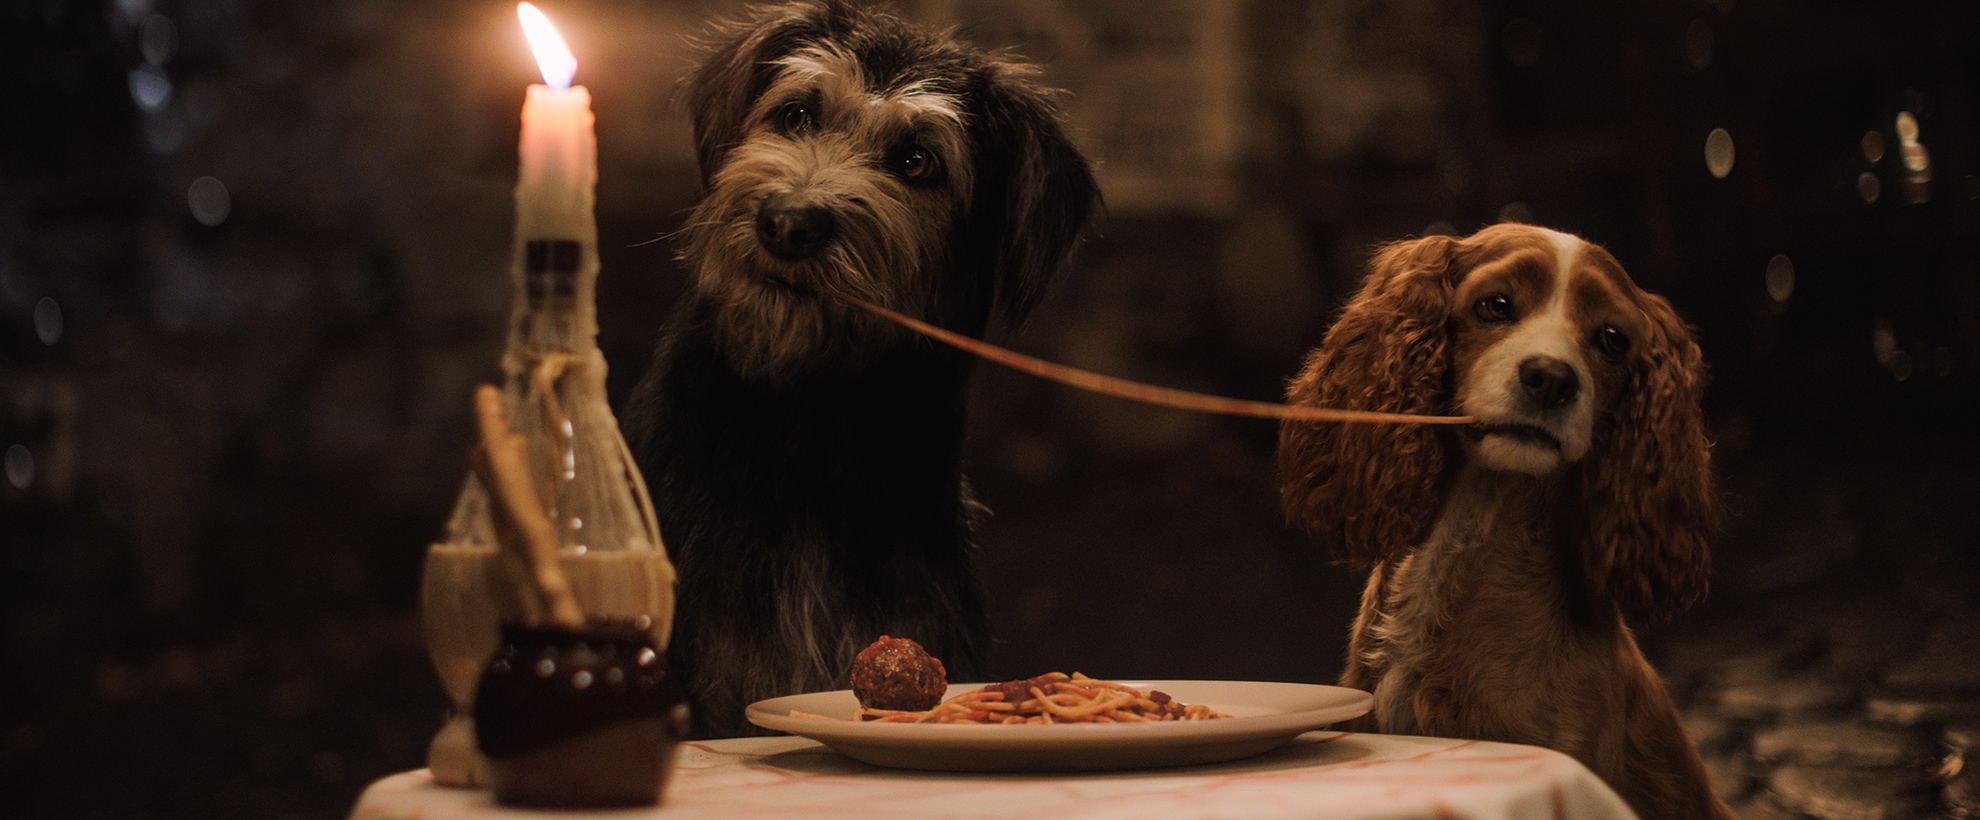 Two dogs sit at a candlelit table, eating either end of one spaghetti strand